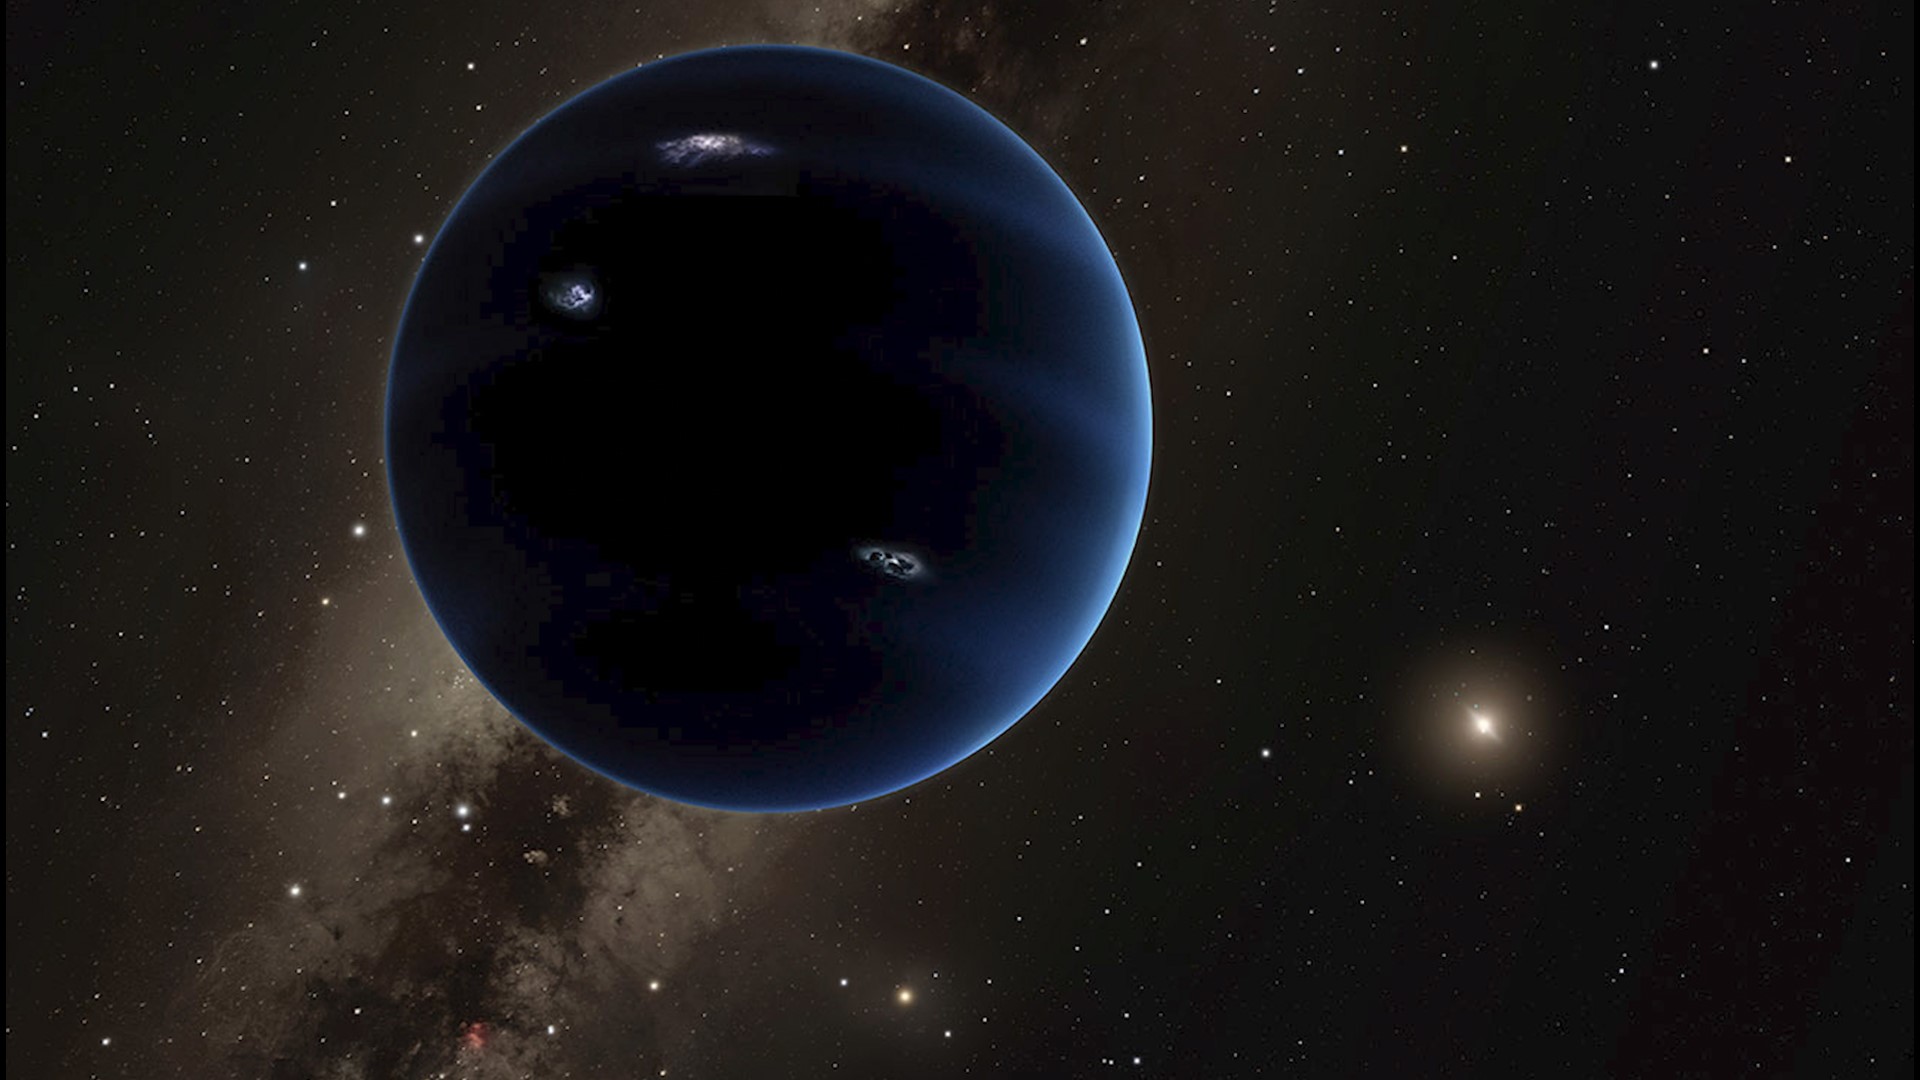 A new study says NASA's Transiting Exoplanet Survey Satellite is capable of detecting the mysterious Planet Nine and may have even already spotted it, scientists just need to sift through the data.